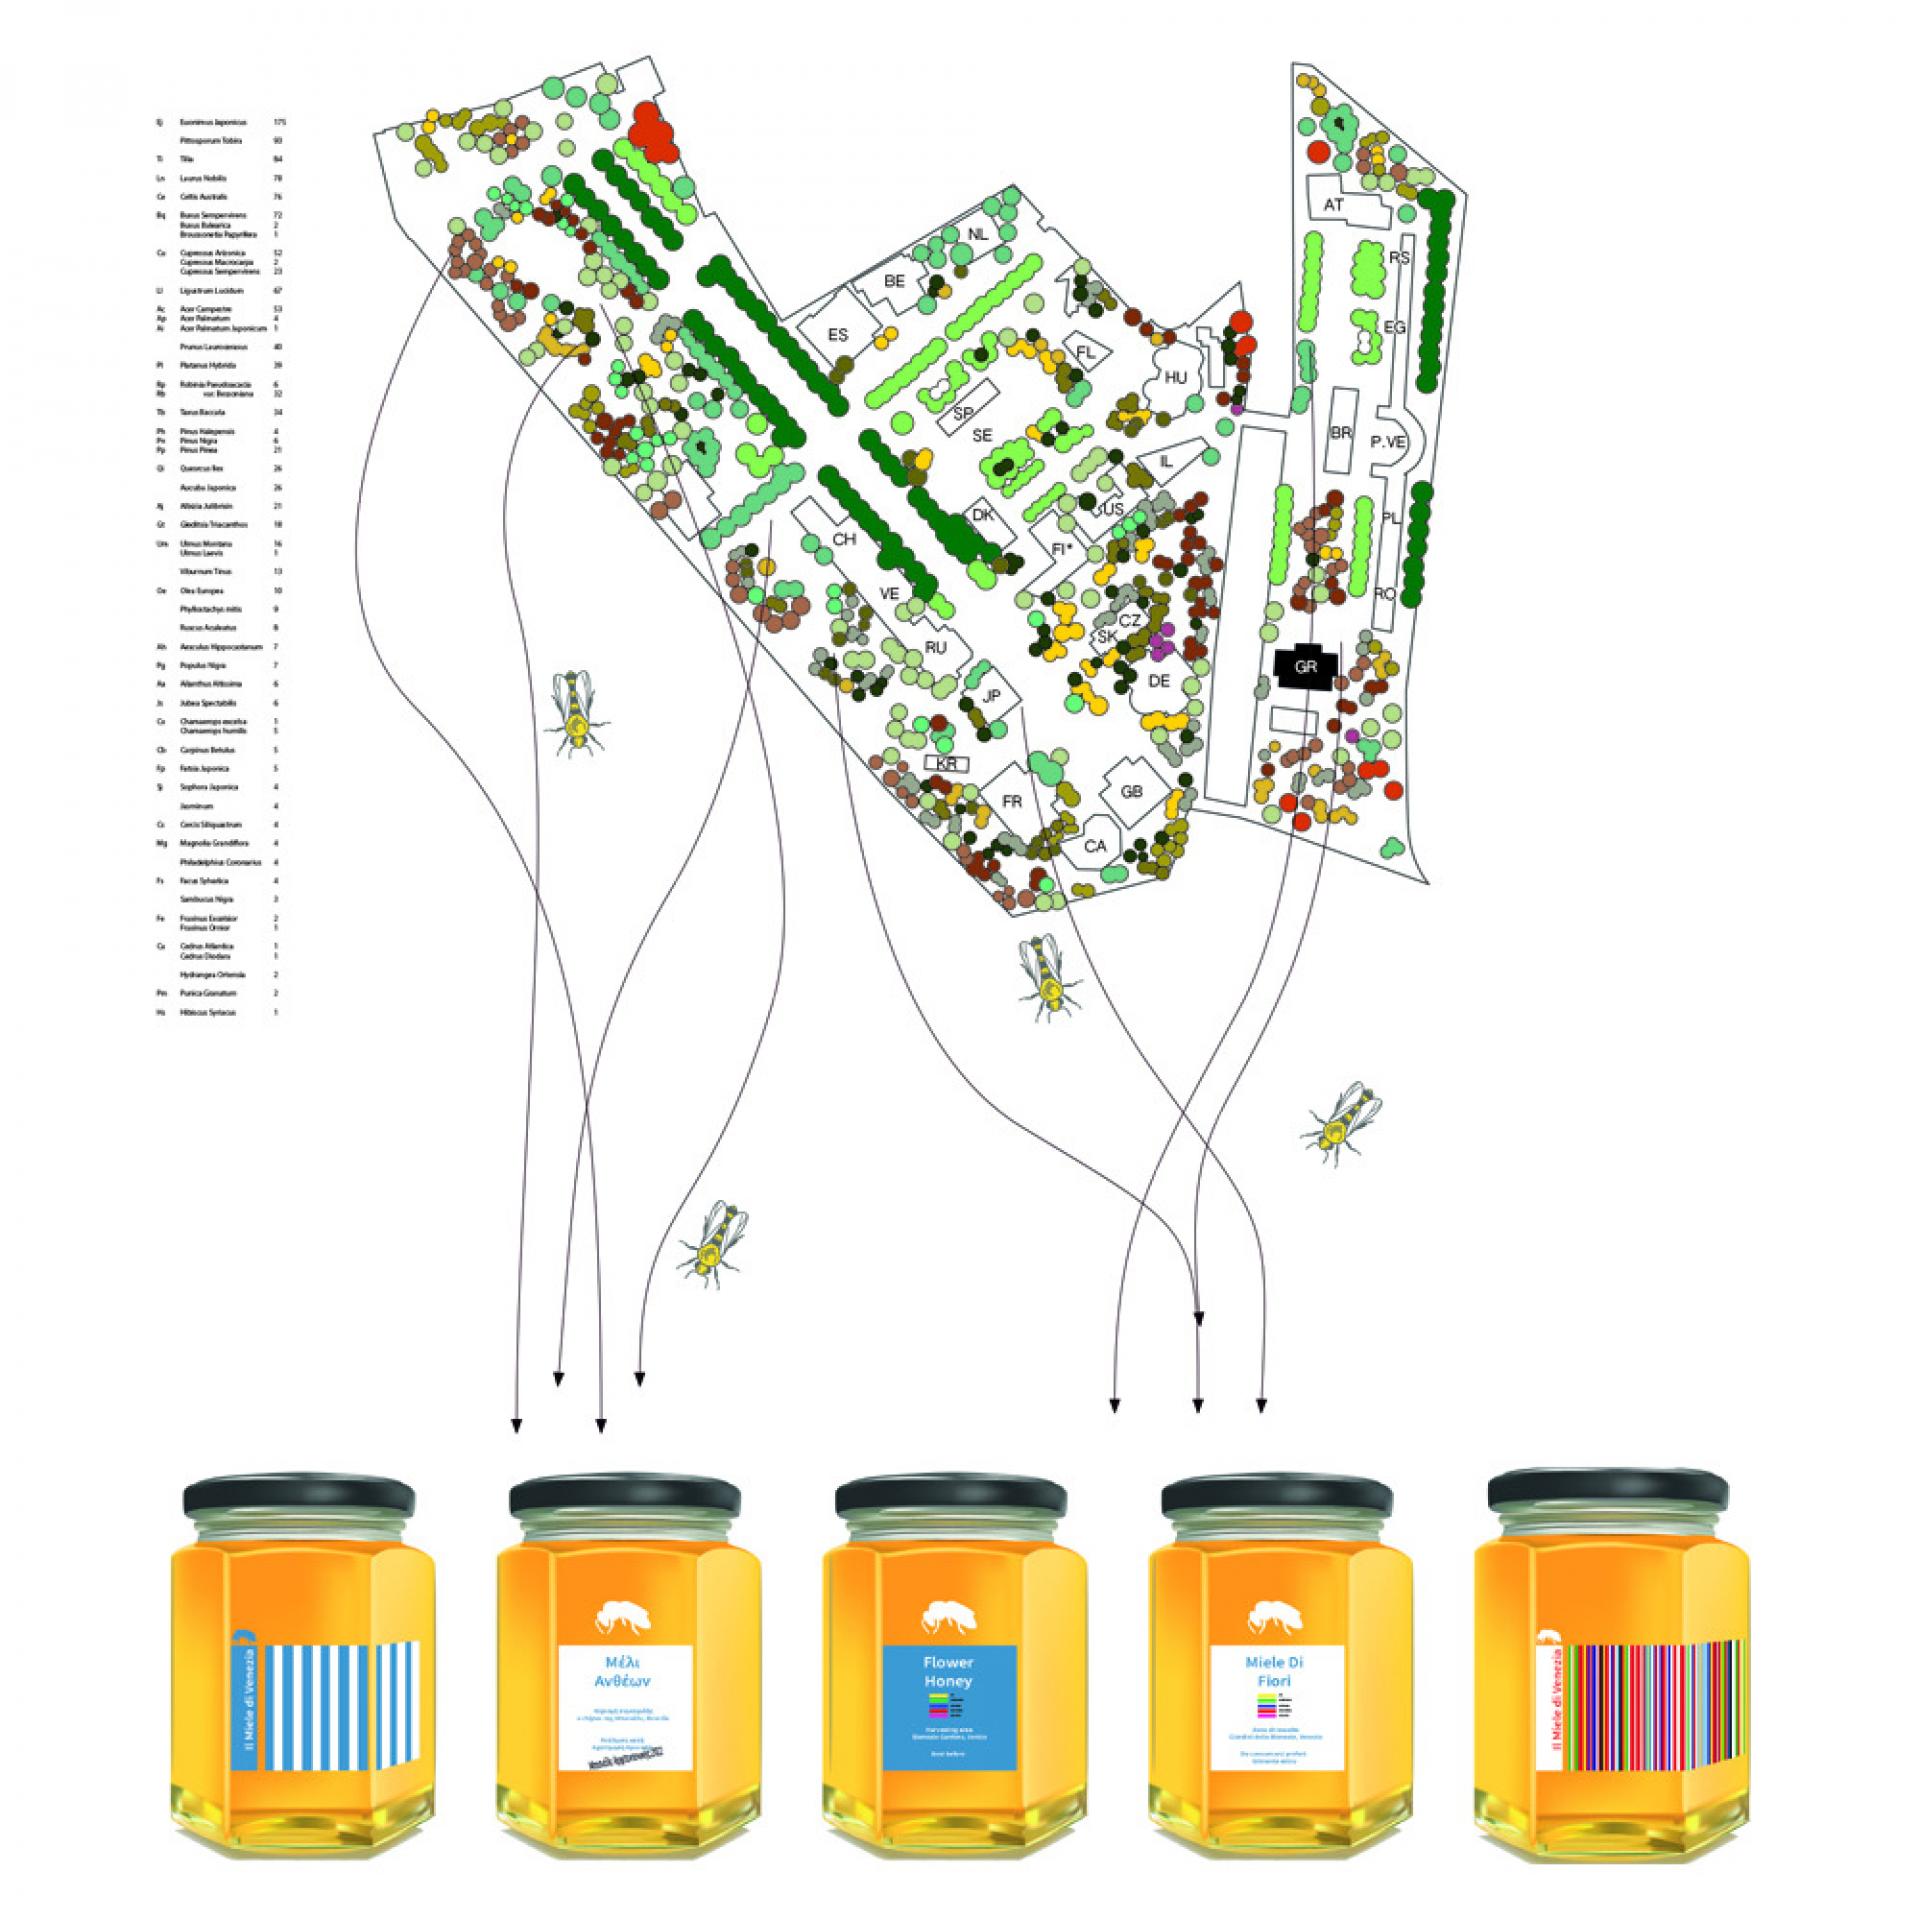 Bees become ambassadors of a metaphorical cross-border pollination of the Biennale’s Giardini. If we were producing honey at the Giardini, would this be a Greek honey, an Italian one, or something else altogether? | Photo © Forty-five degrees